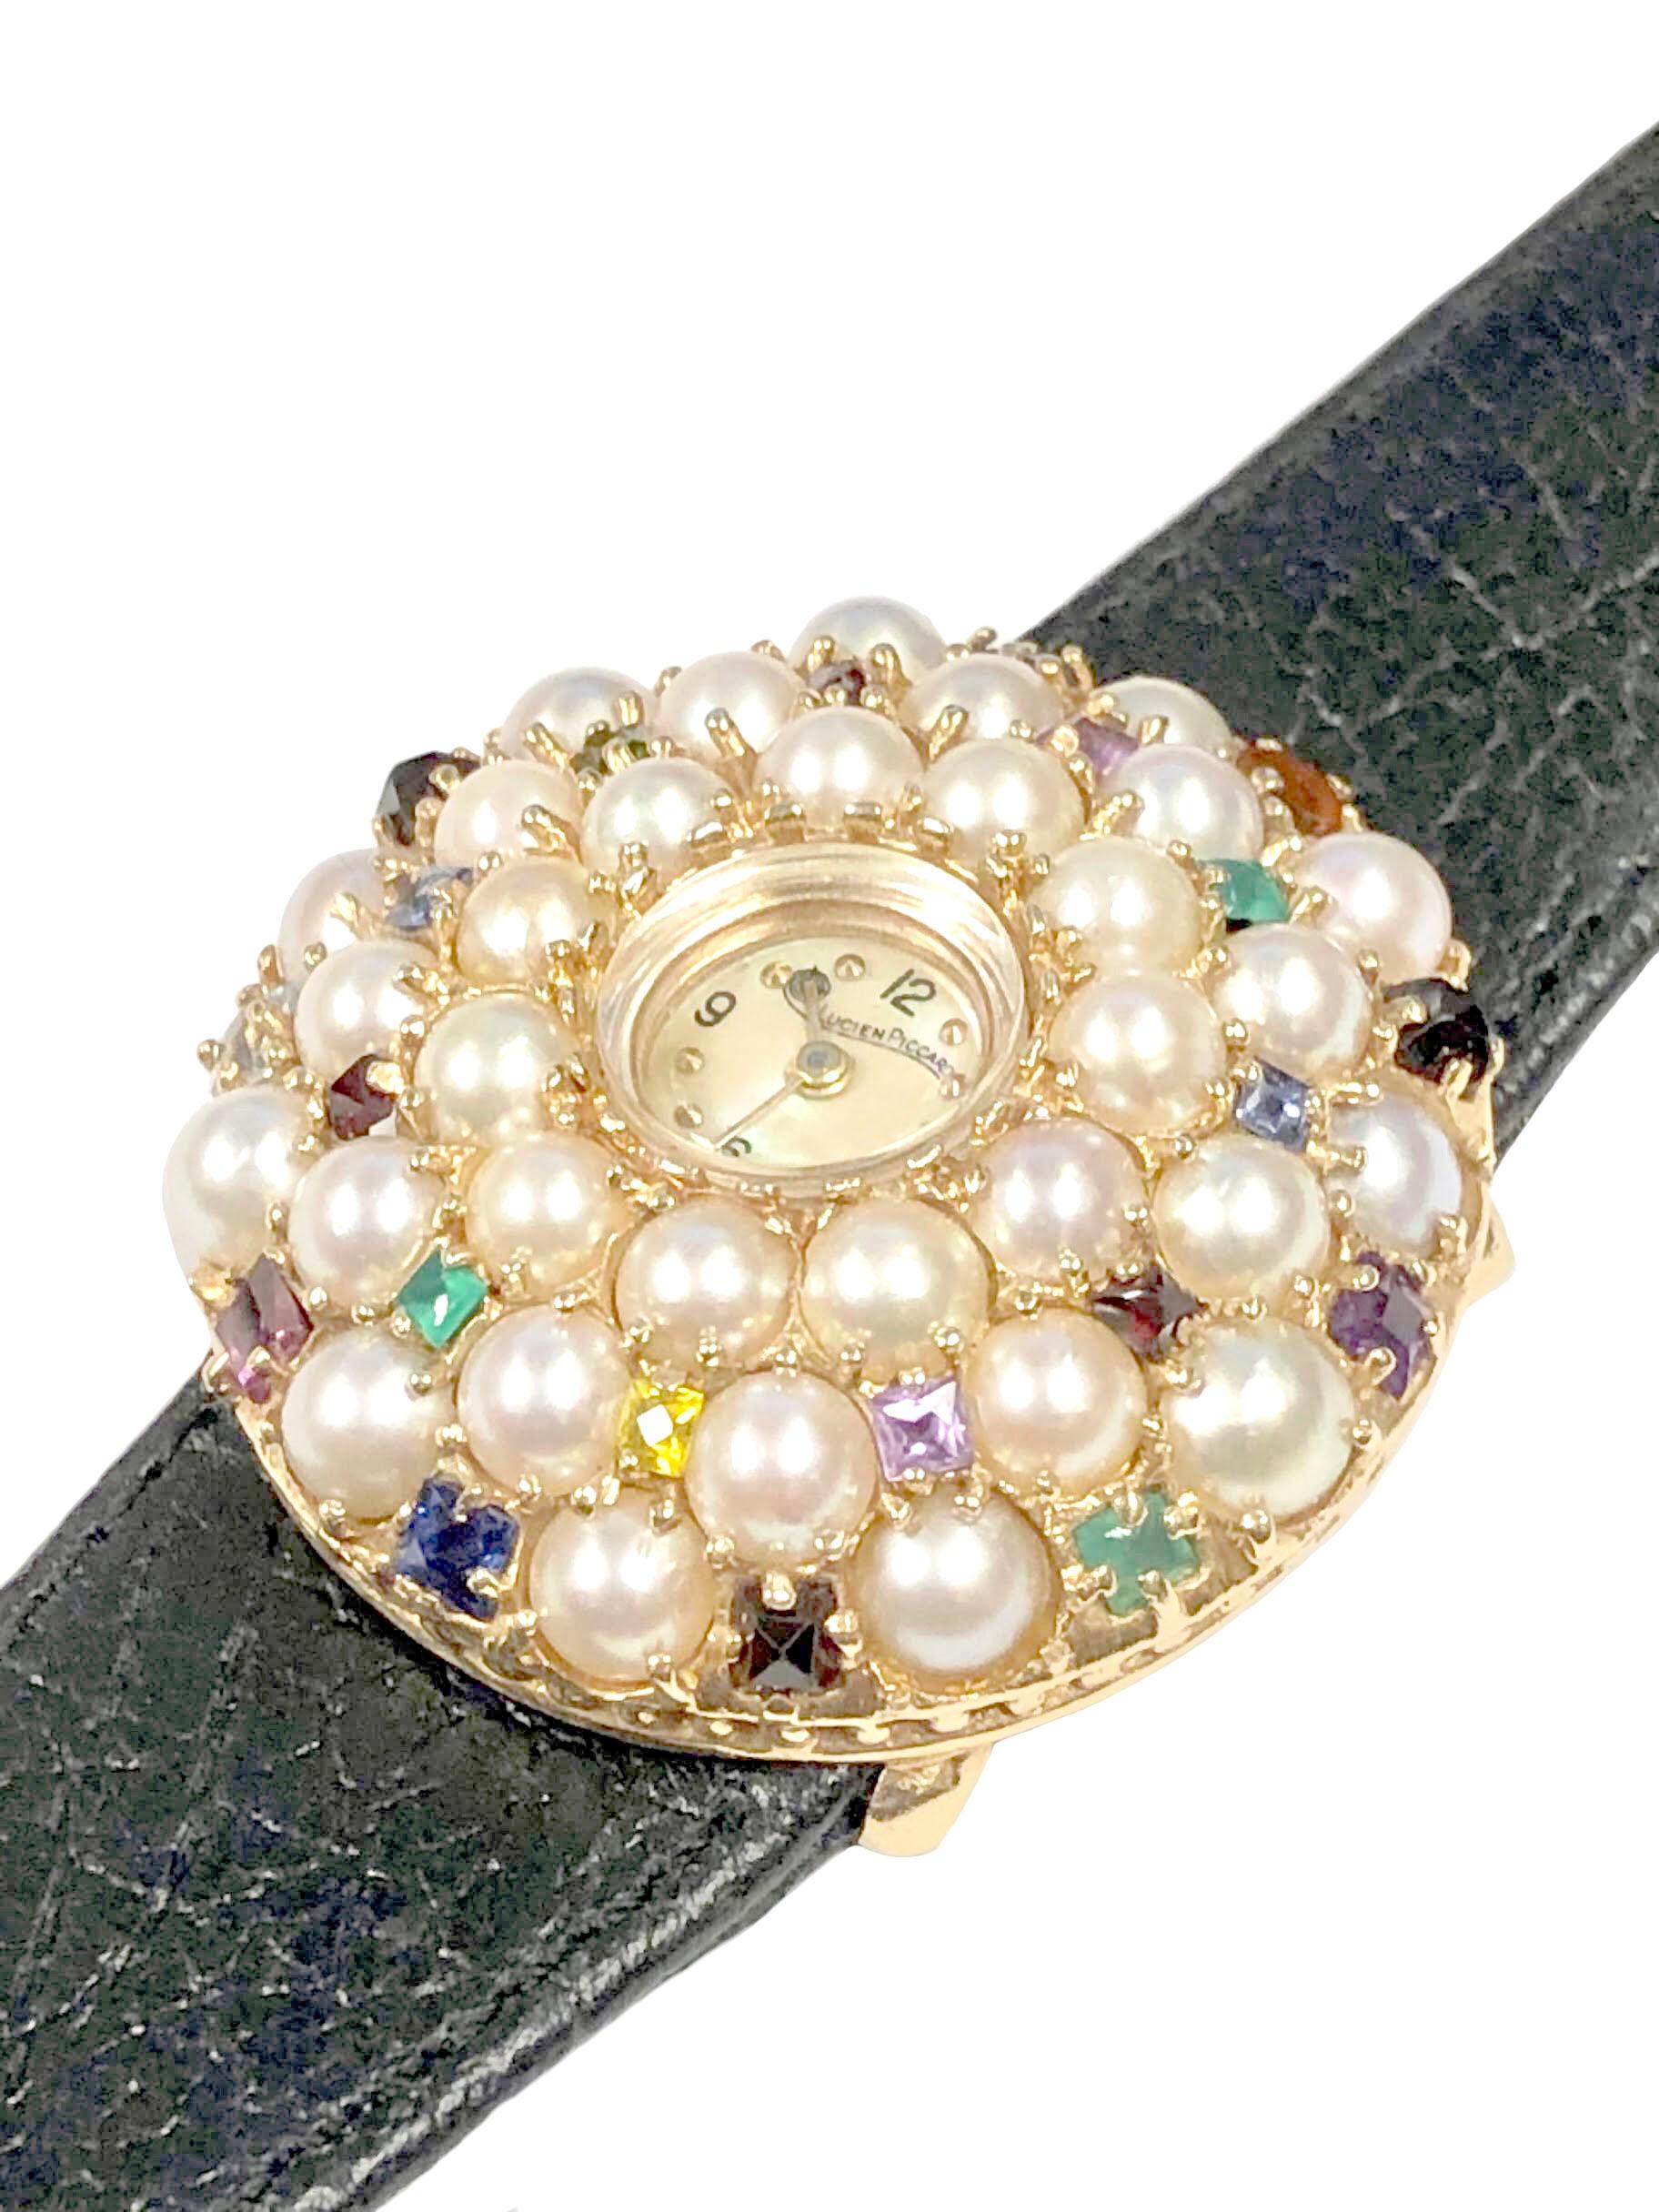 Circa 1960s Lucien Piccard Ladies Wrist Watch, the 14k Yellow Gold case measures 36 M.M. in diameter and 10 M.M. in thickness / height, set with Round Cultured Pearls measuring 4.5 M.M. and further set with Square Step cut and French Cut Emerald,